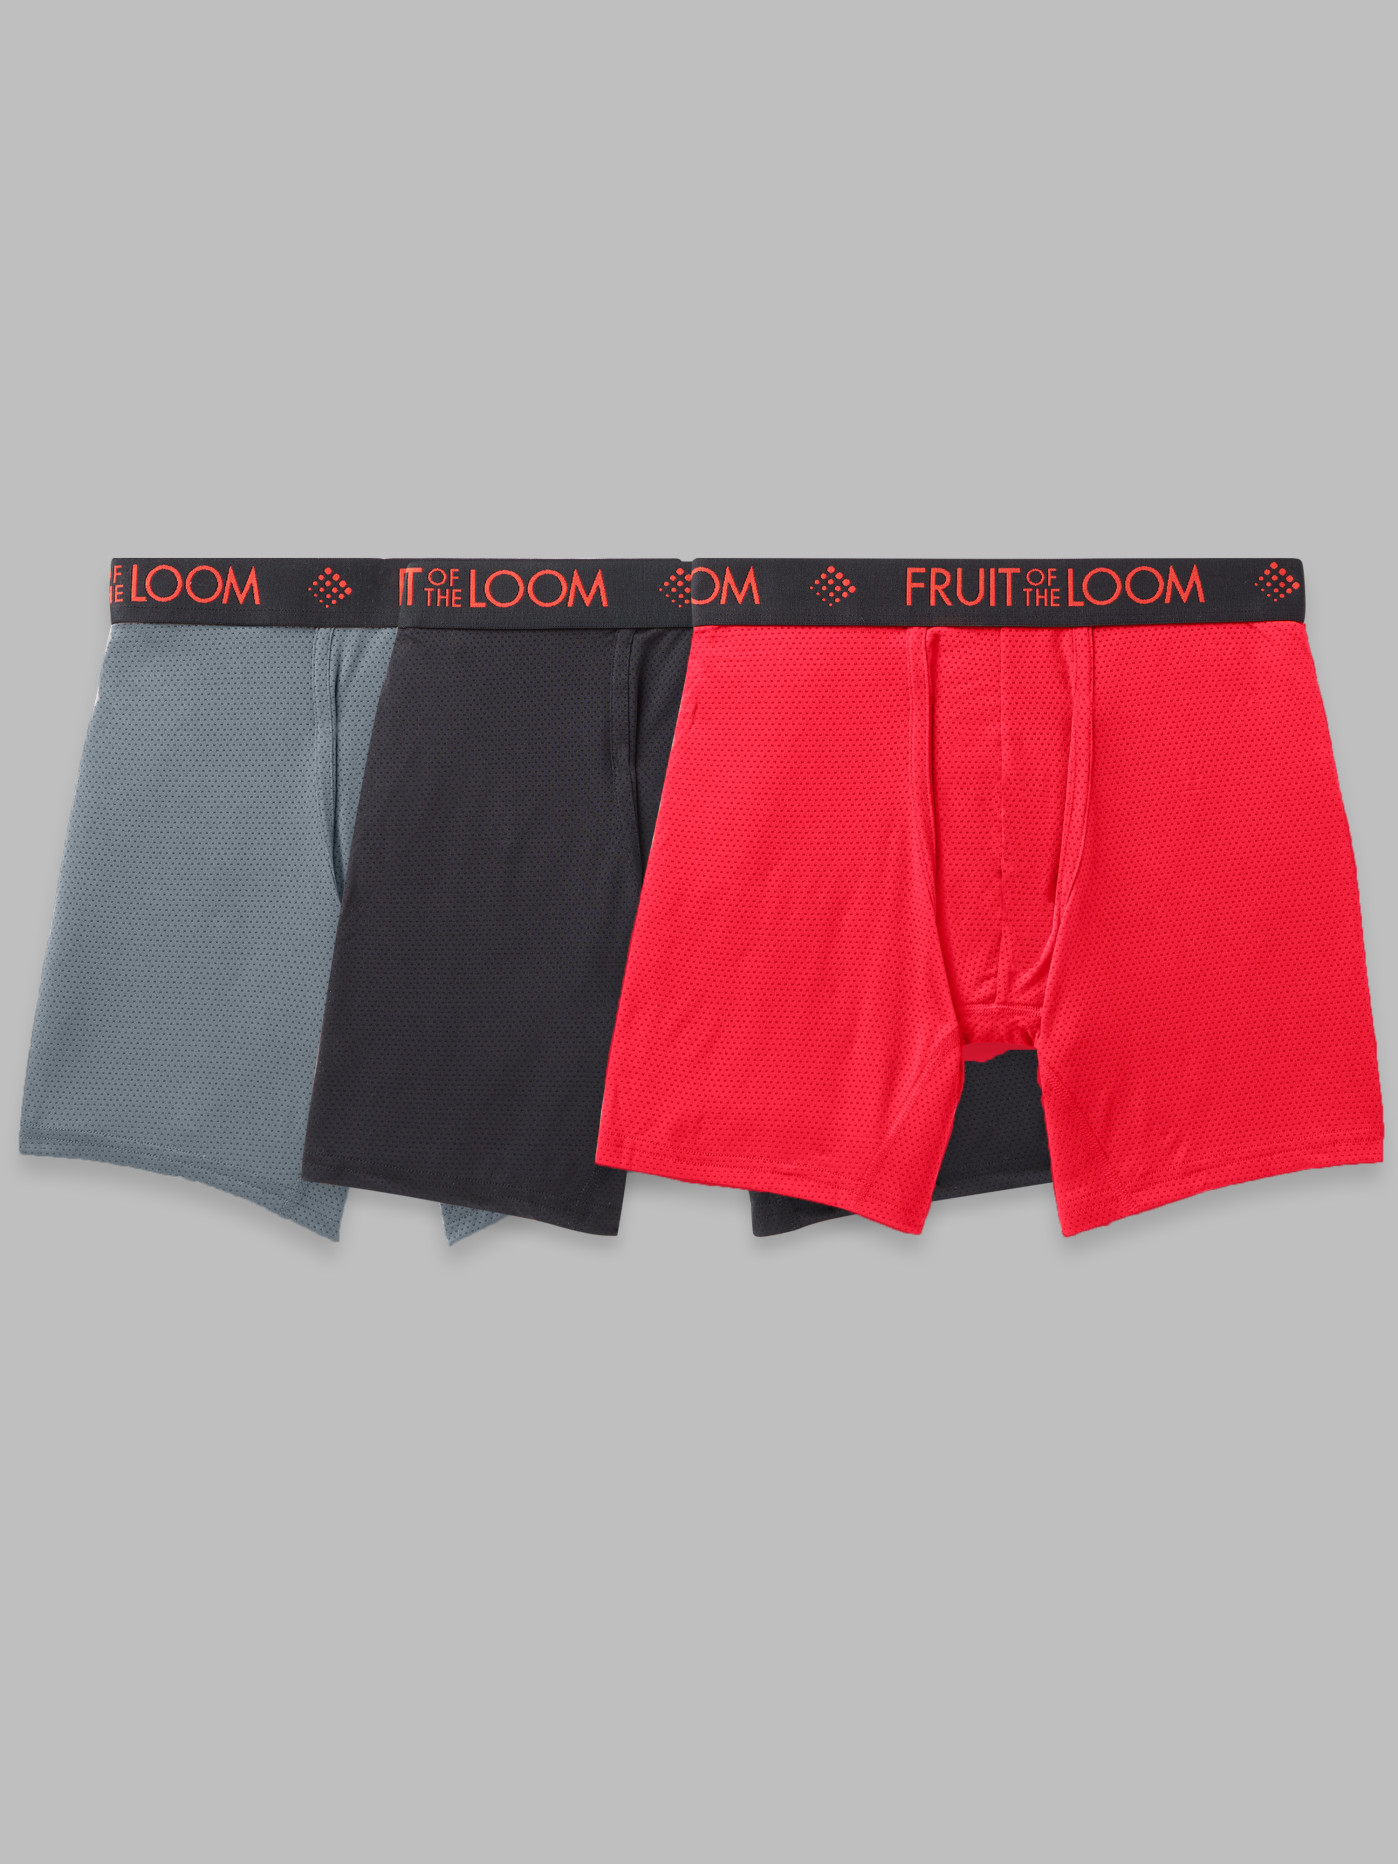 Fruit of the Loom Boys Breathable Micro Mesh Boxer Brief, 4-Pack, Sizes S-L  